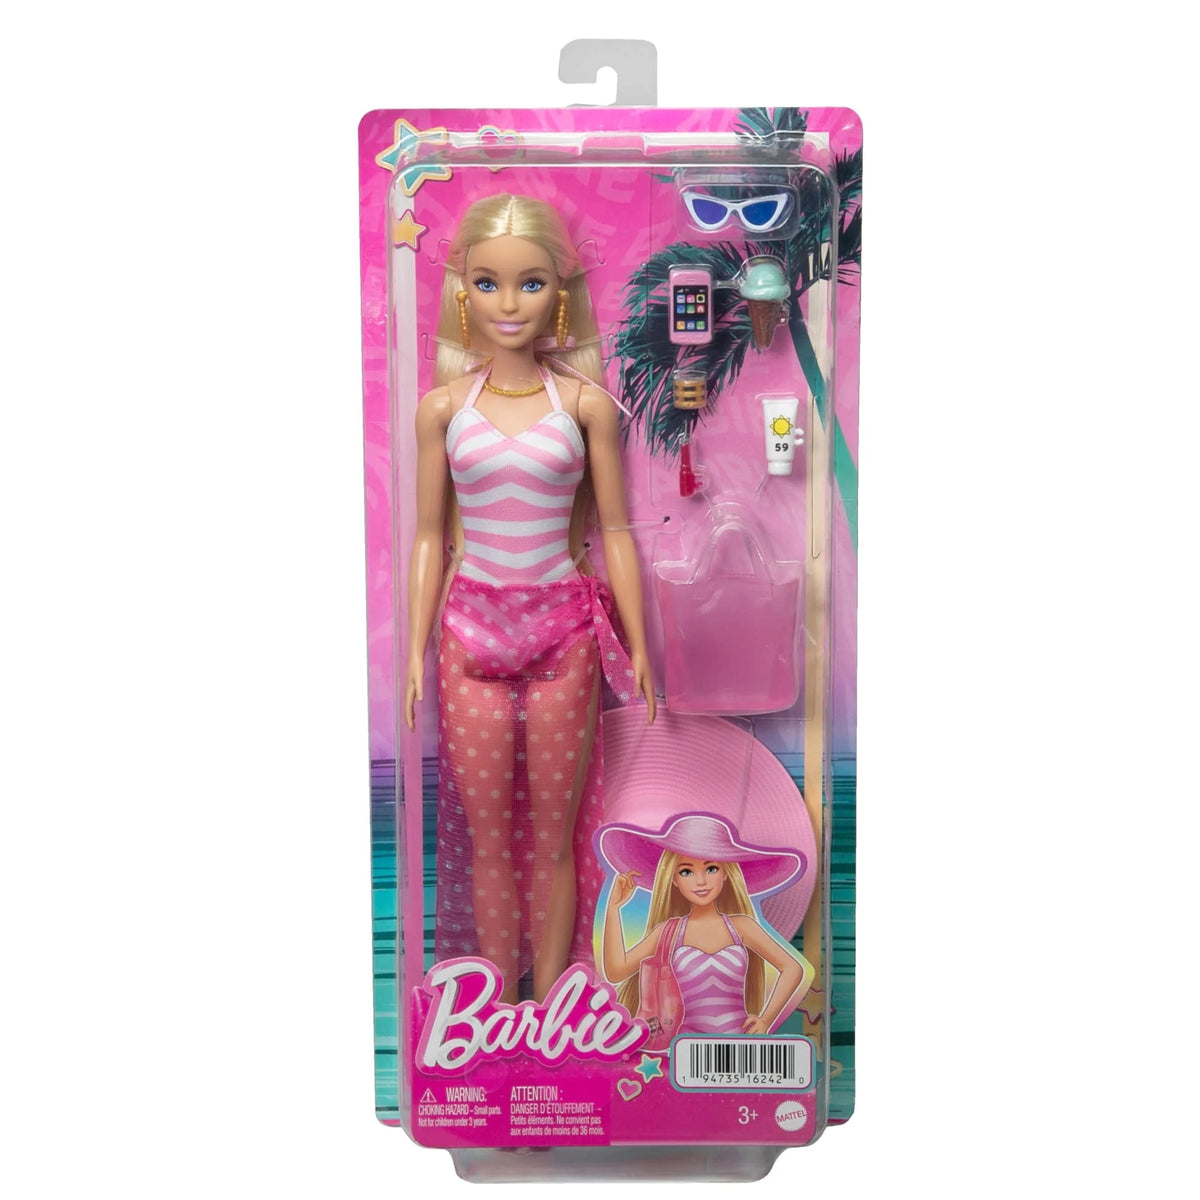 Blonde Barbie Doll with Swimsuit and Beach-Themed Accessories